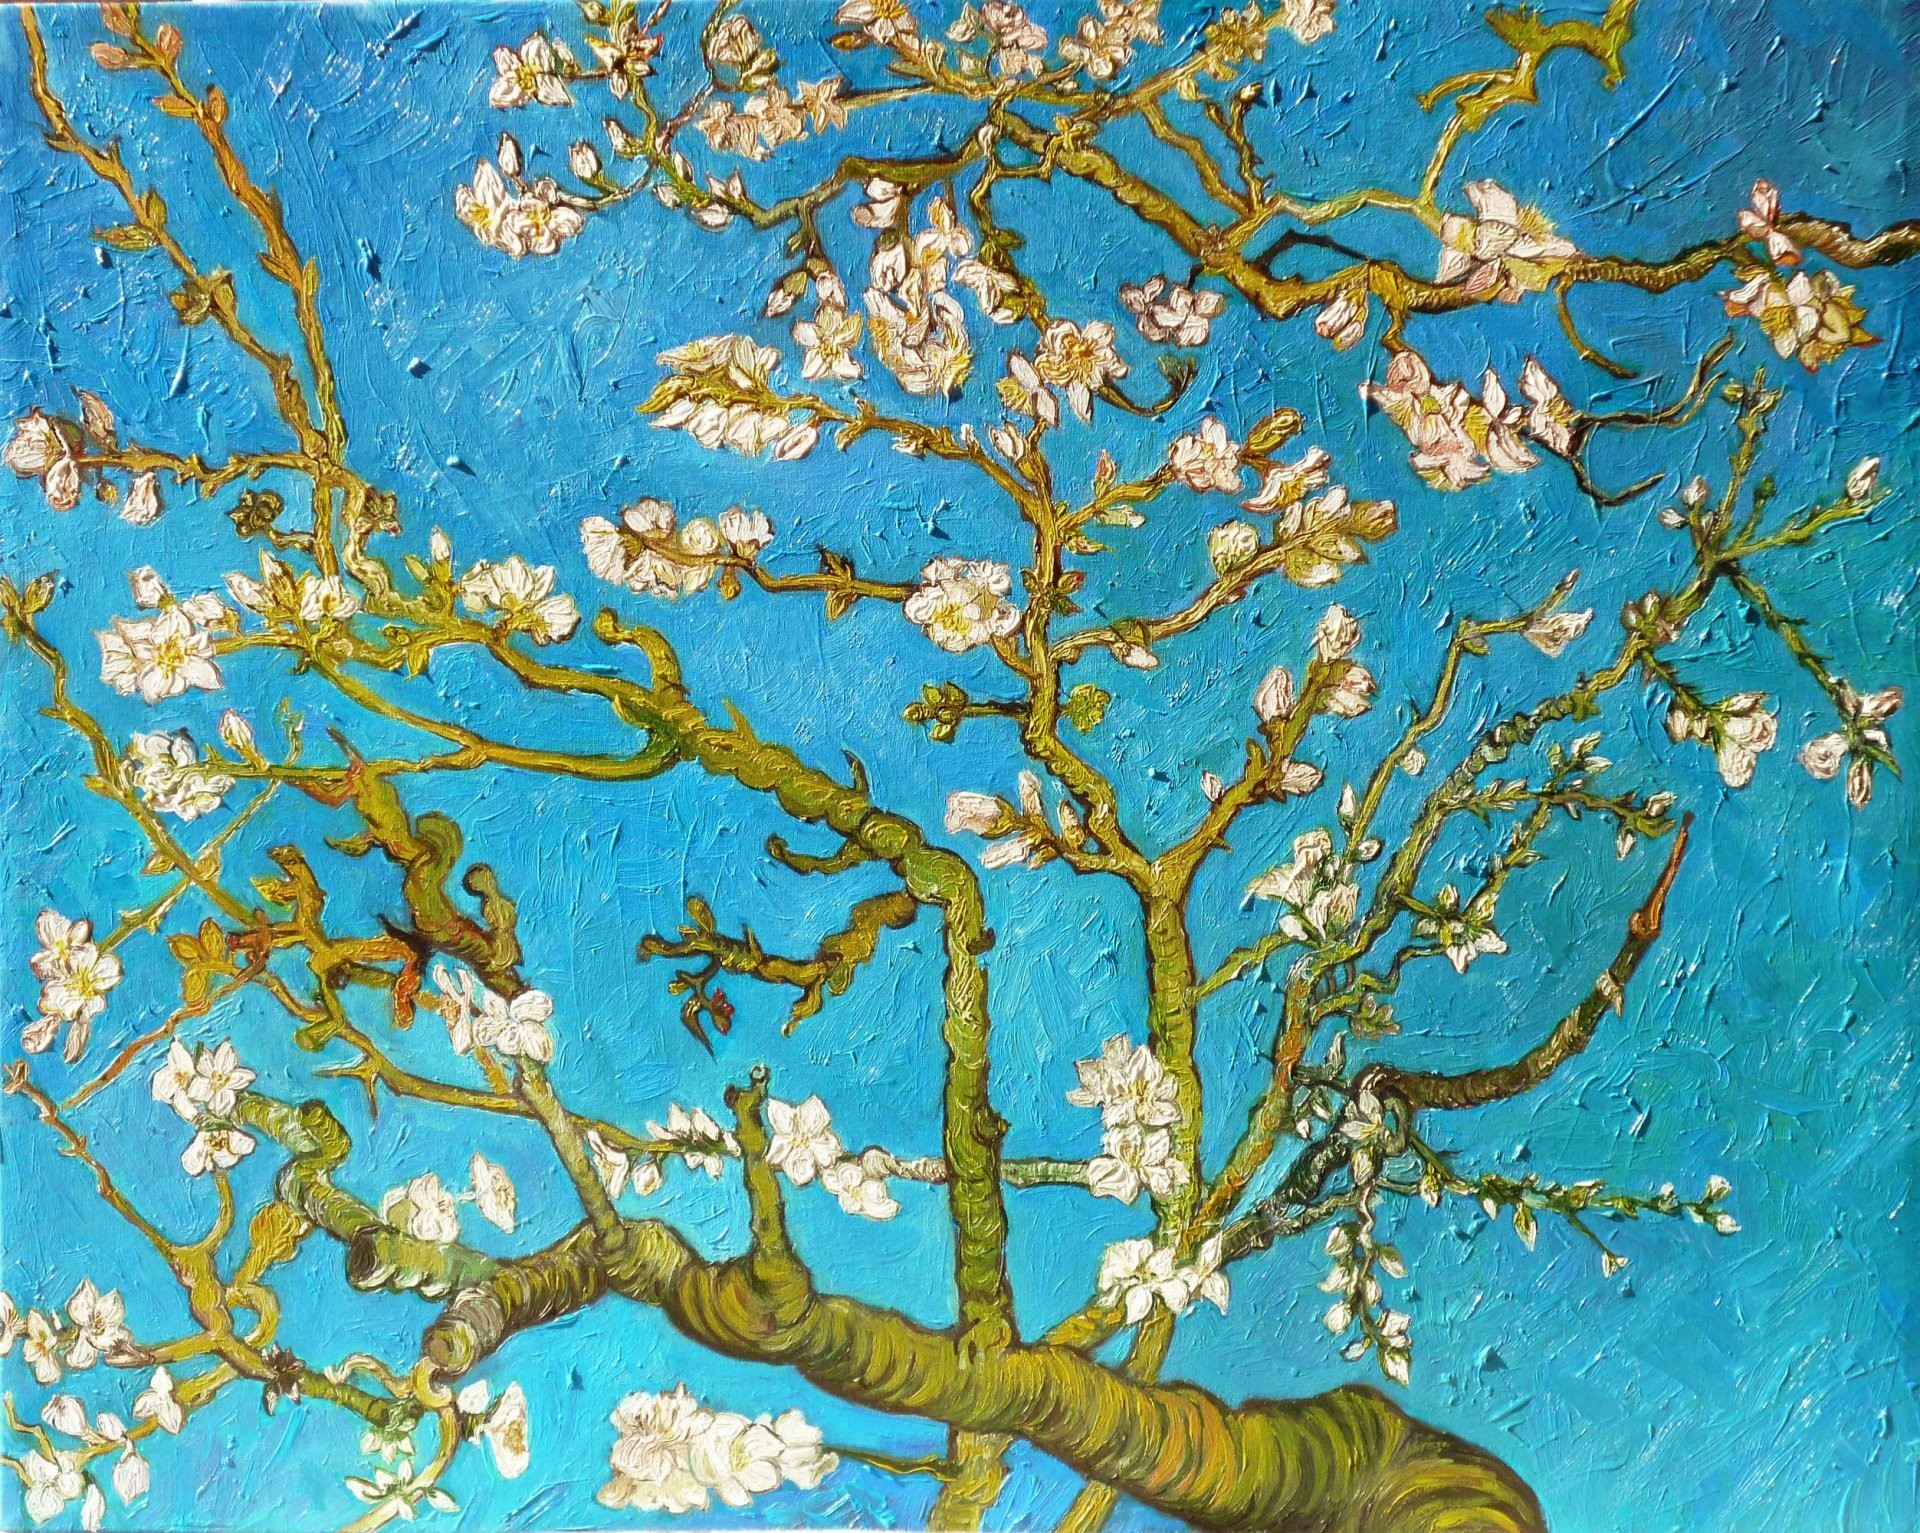 Vincent Van Gough Almond Blossom Painting Wallpaper for Wall  lifencolors